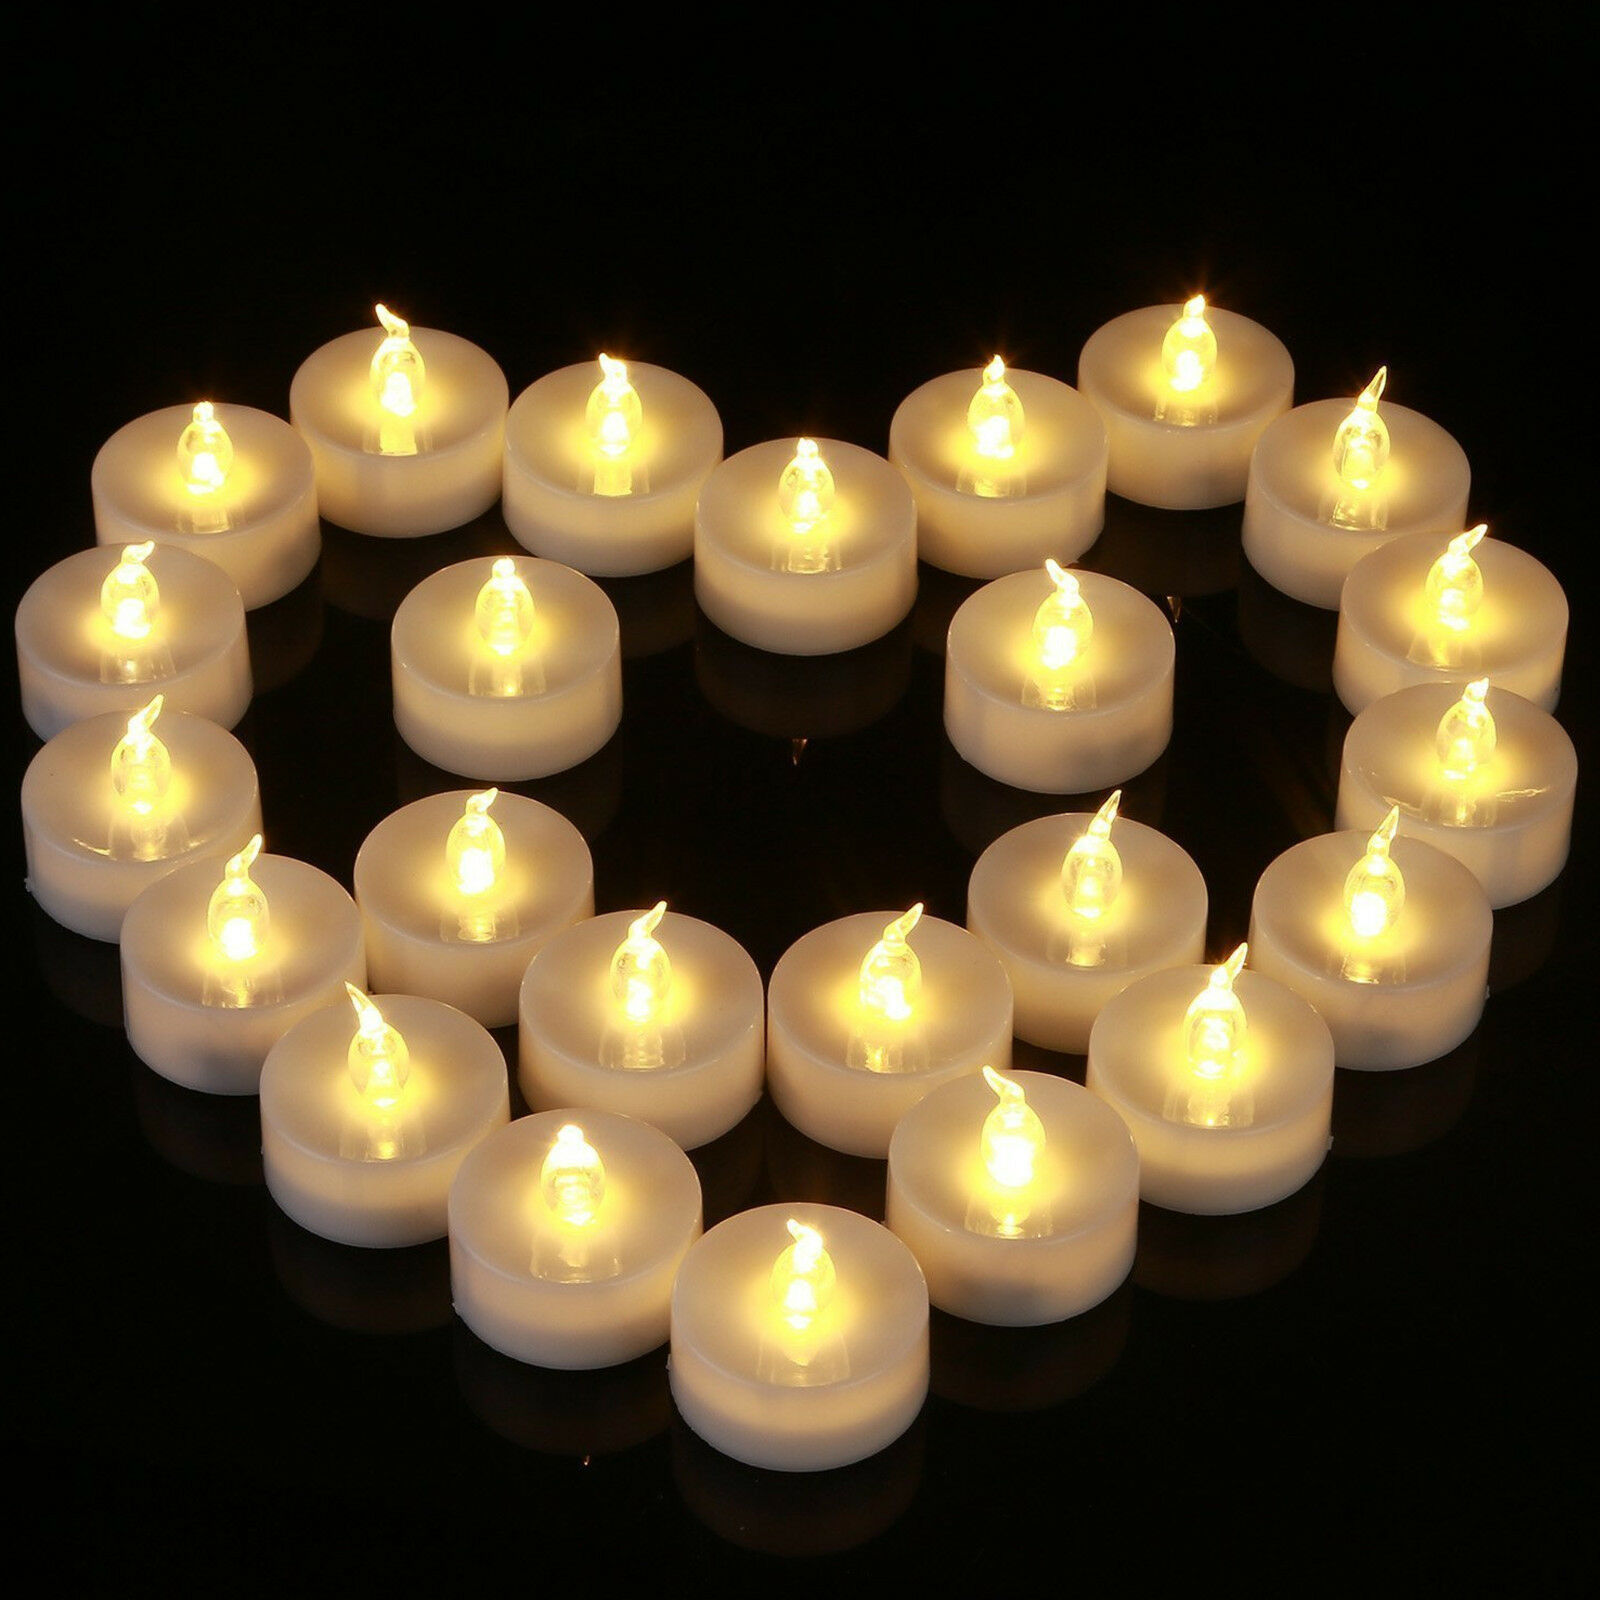 12Pcs Battery Operated LED Tea Lights Candles Flameless Flickering Weeding Decor